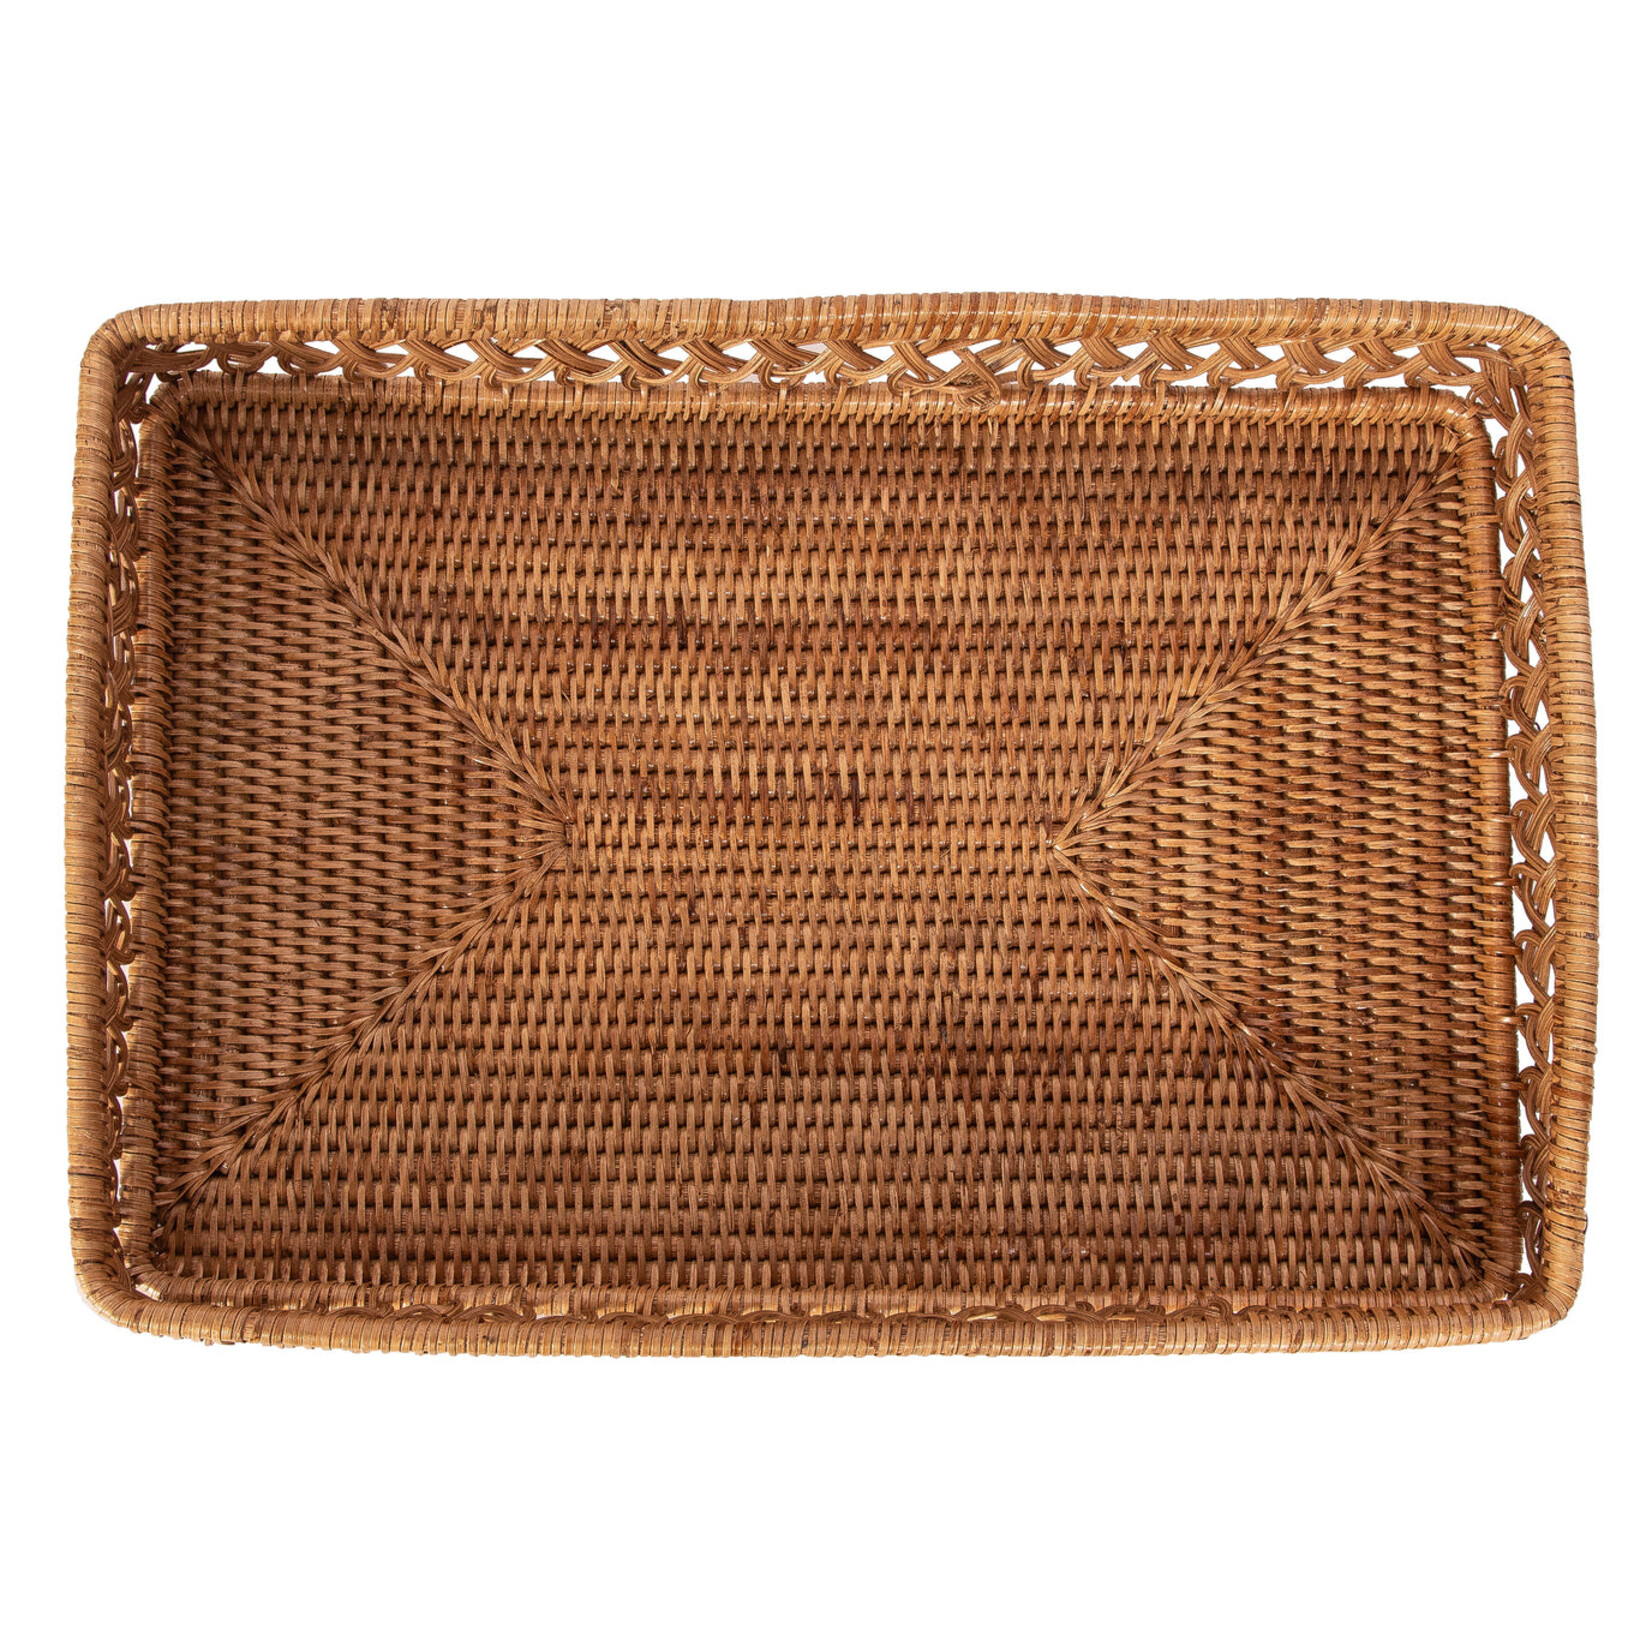 Artifacts Trading Company Rattan Design Rectangle Tray